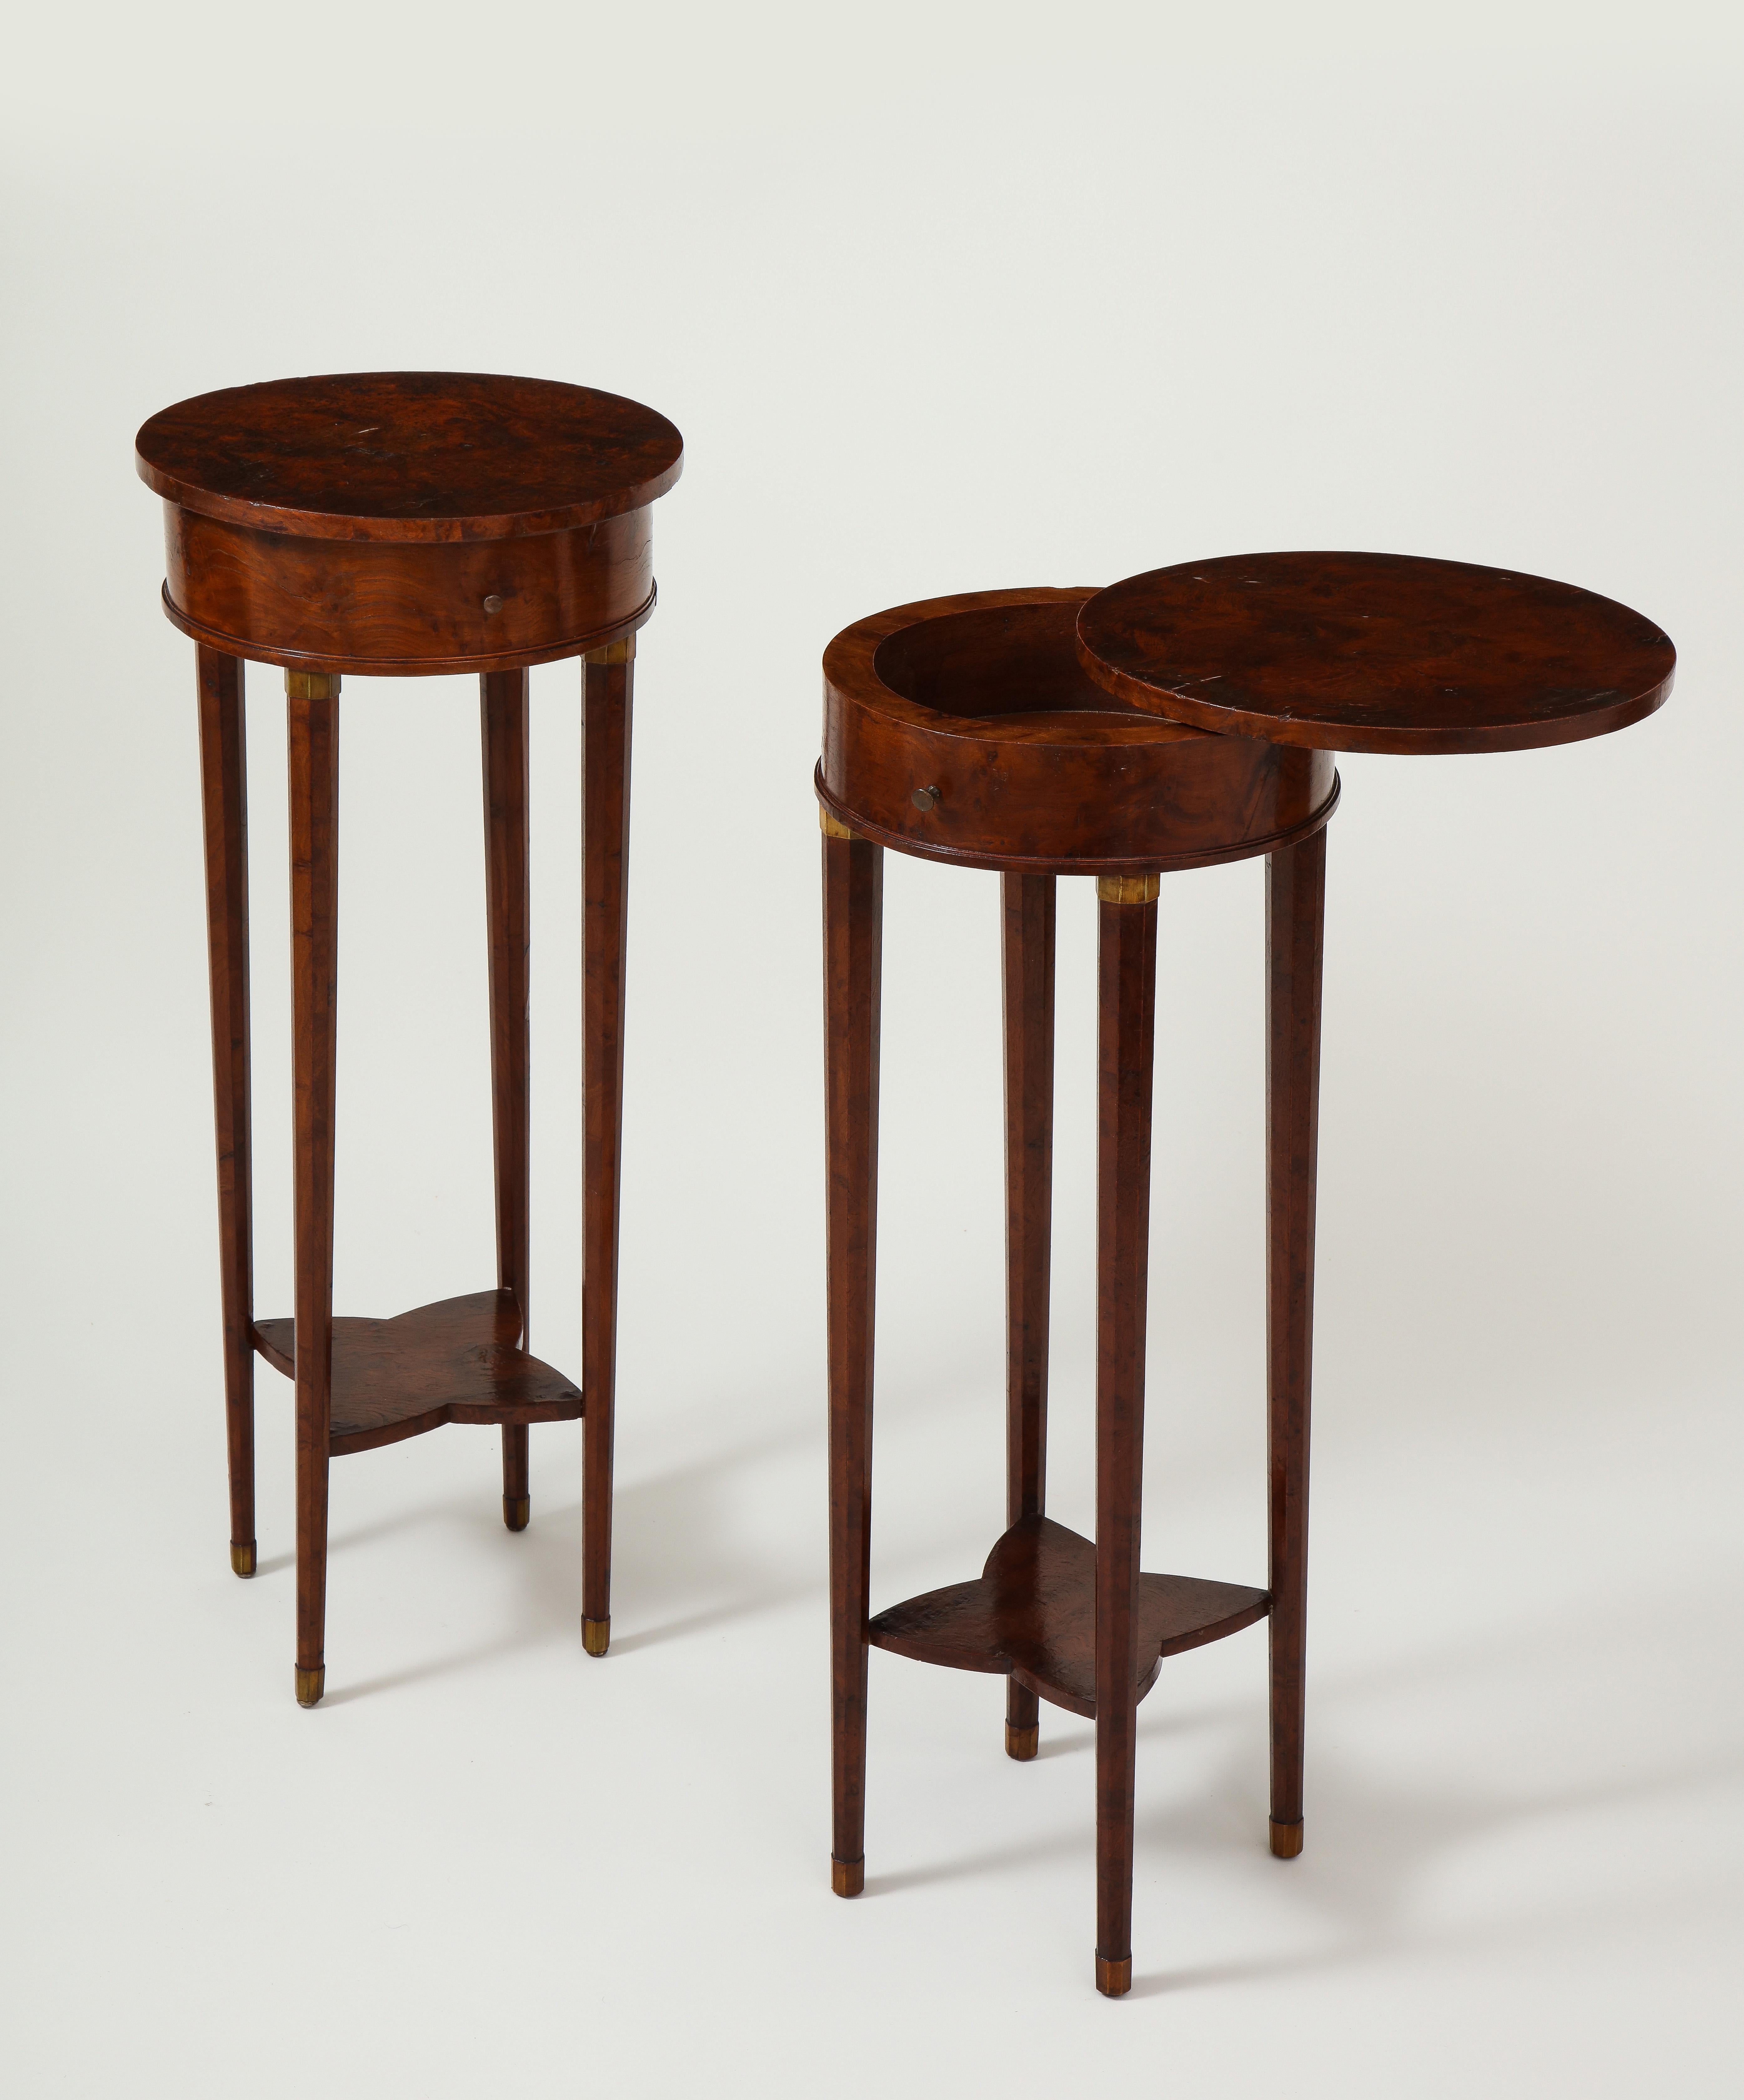 Each with round highly figured top that slide to reveal the interior; raised on tapering legs with fruitwood capitals and feet to simulate brass mounts; joined by shaped platform stretchers.